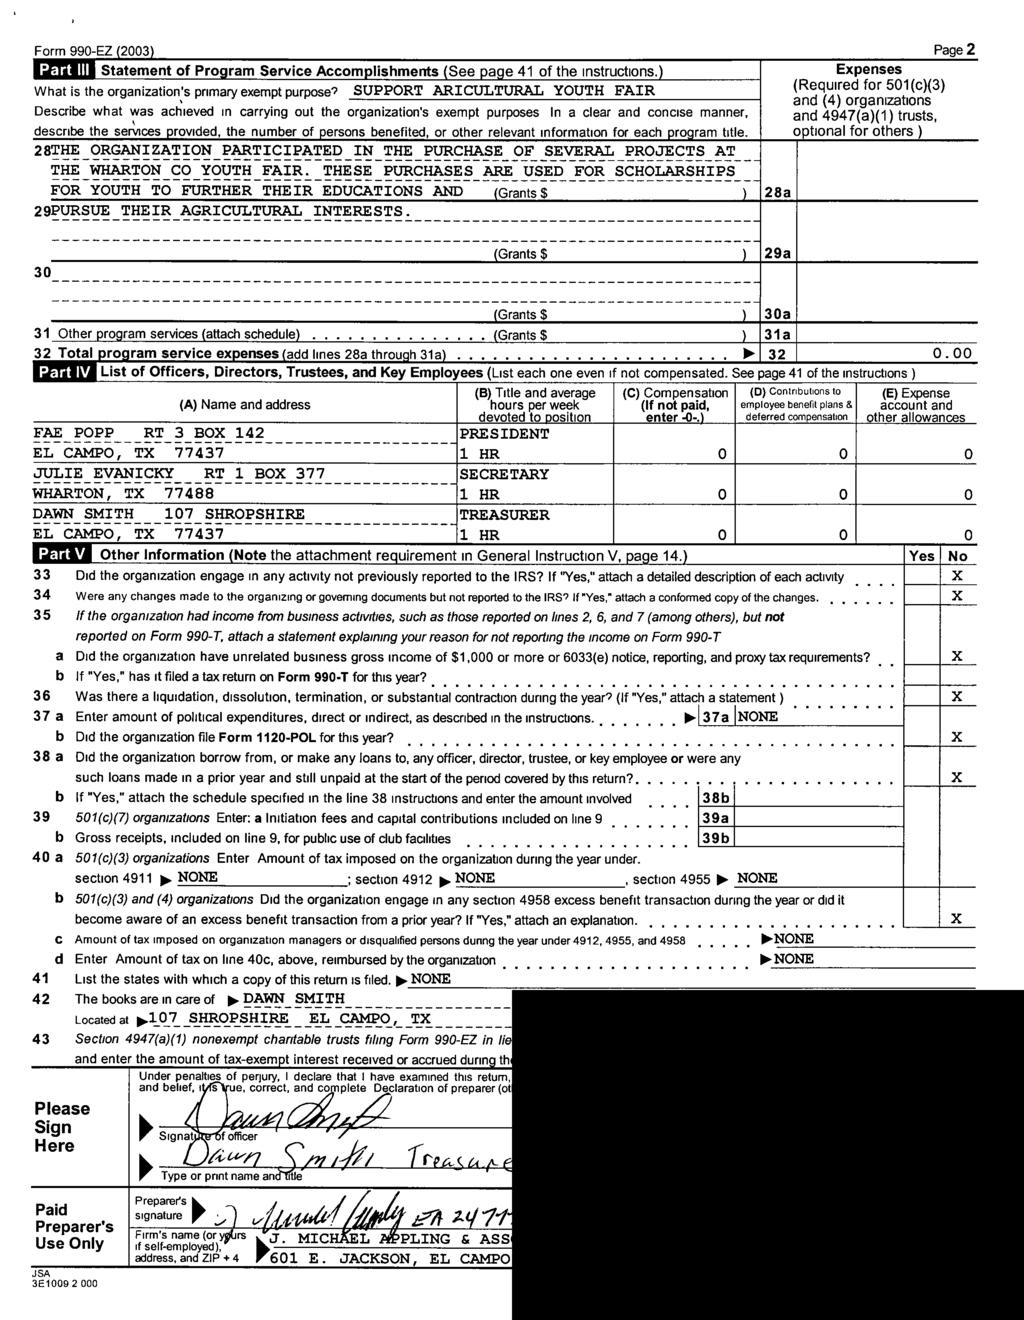 Form 990-EZ 2003 Statement of Pro gram Service Accomplishments See page 41 of the instructions.